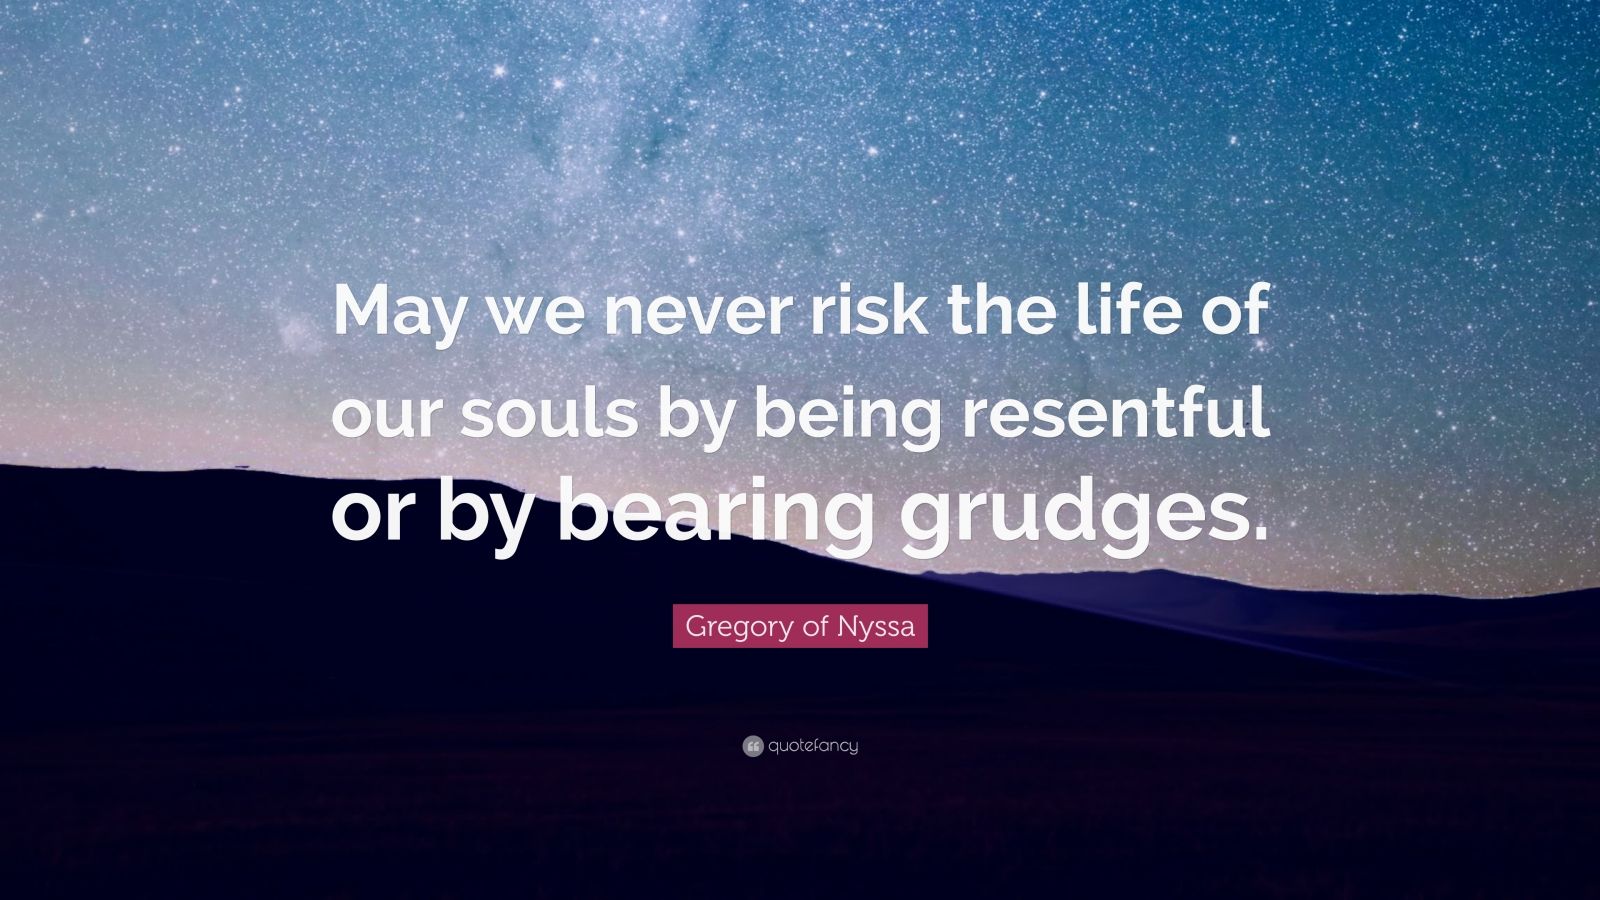 Gregory of Nyssa Quote: “May we never risk the life of our souls by ...